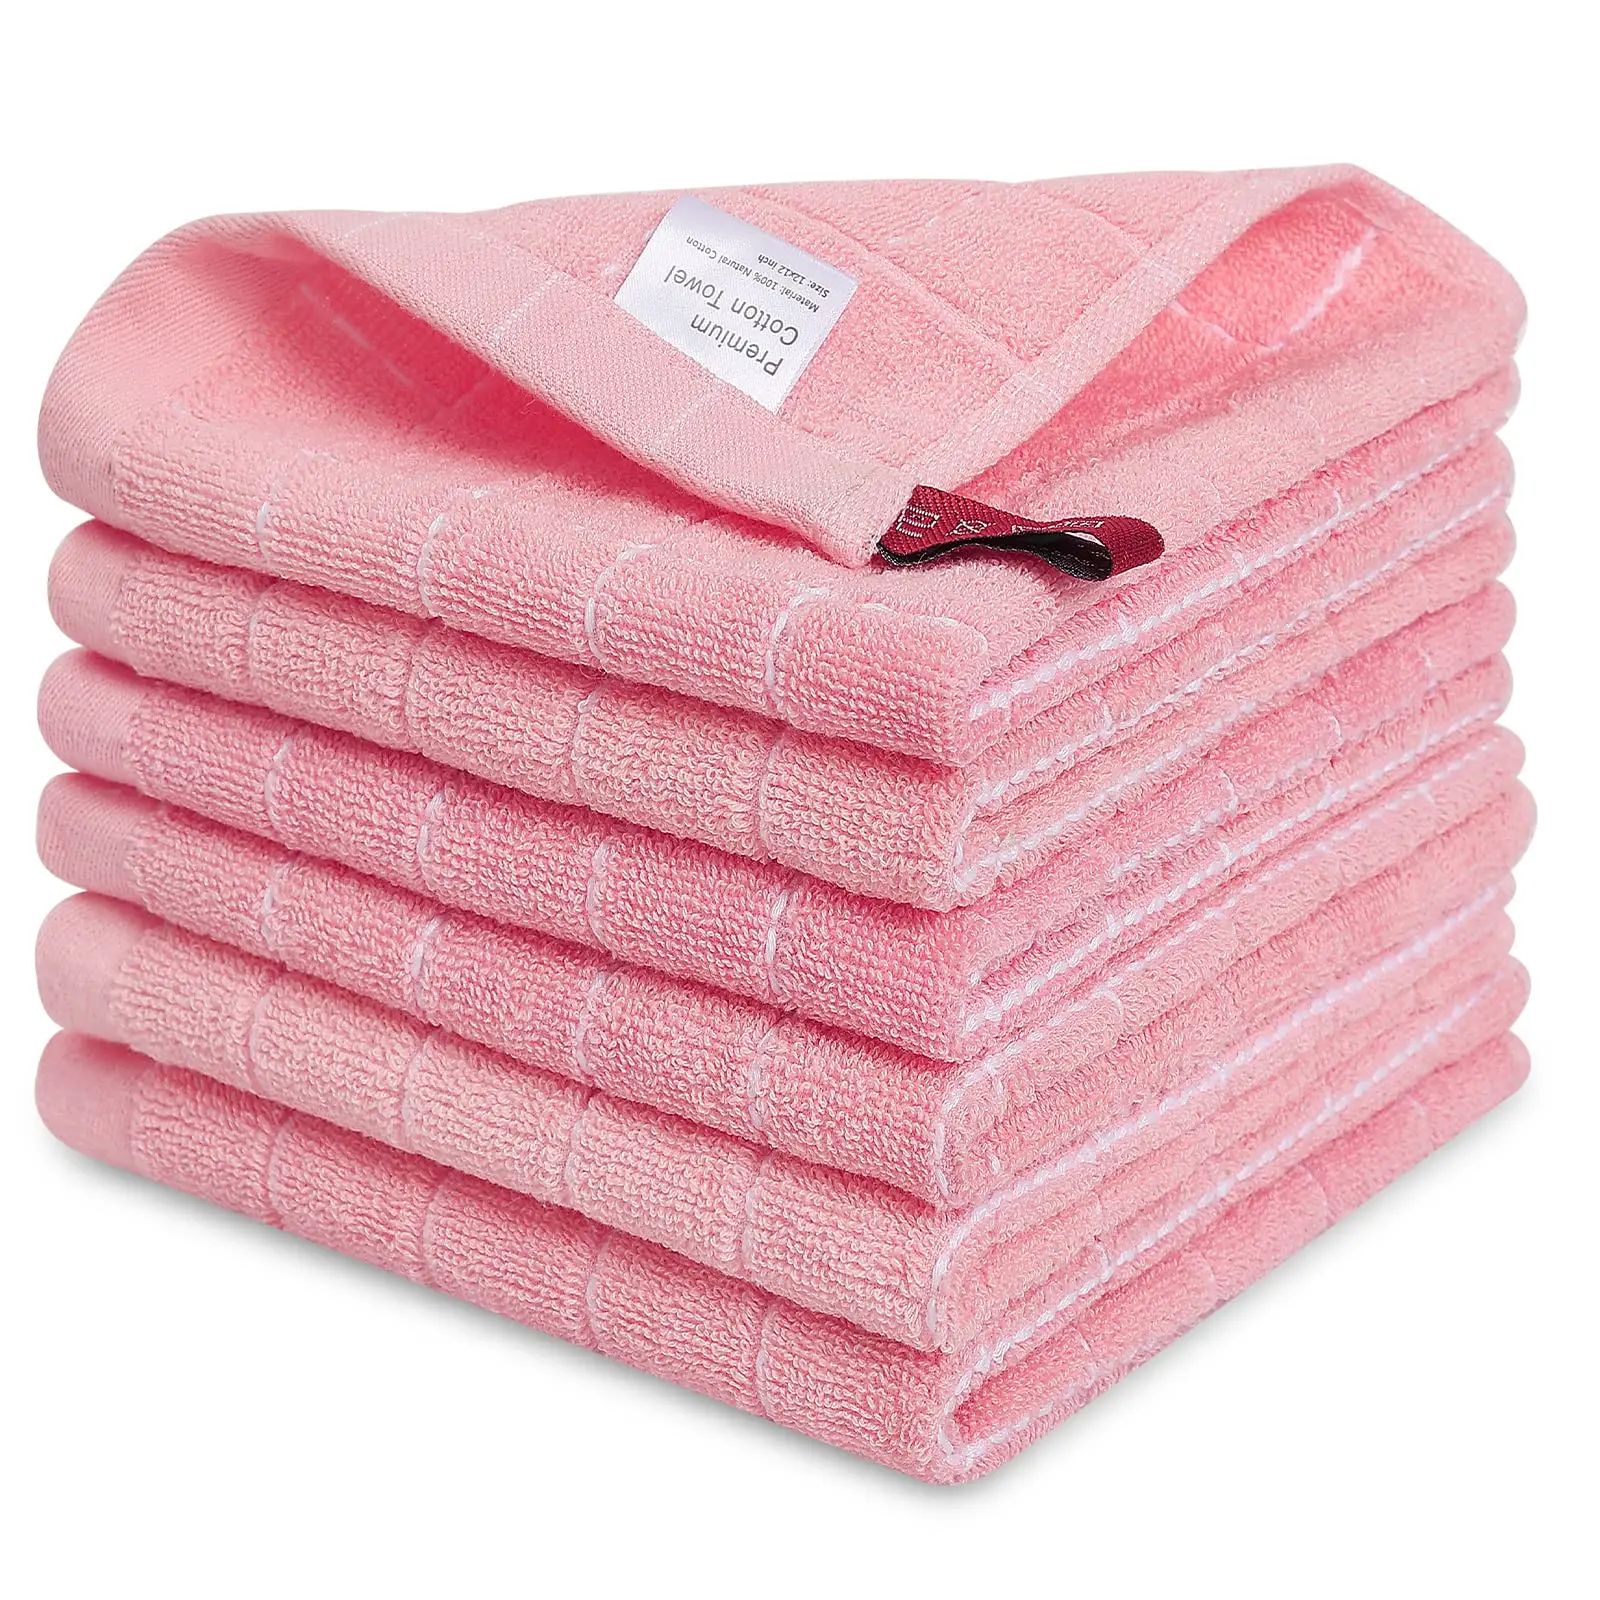 6pcs 100% Cotton Kitchen Towel Absorbent Dish Towels Cleaning